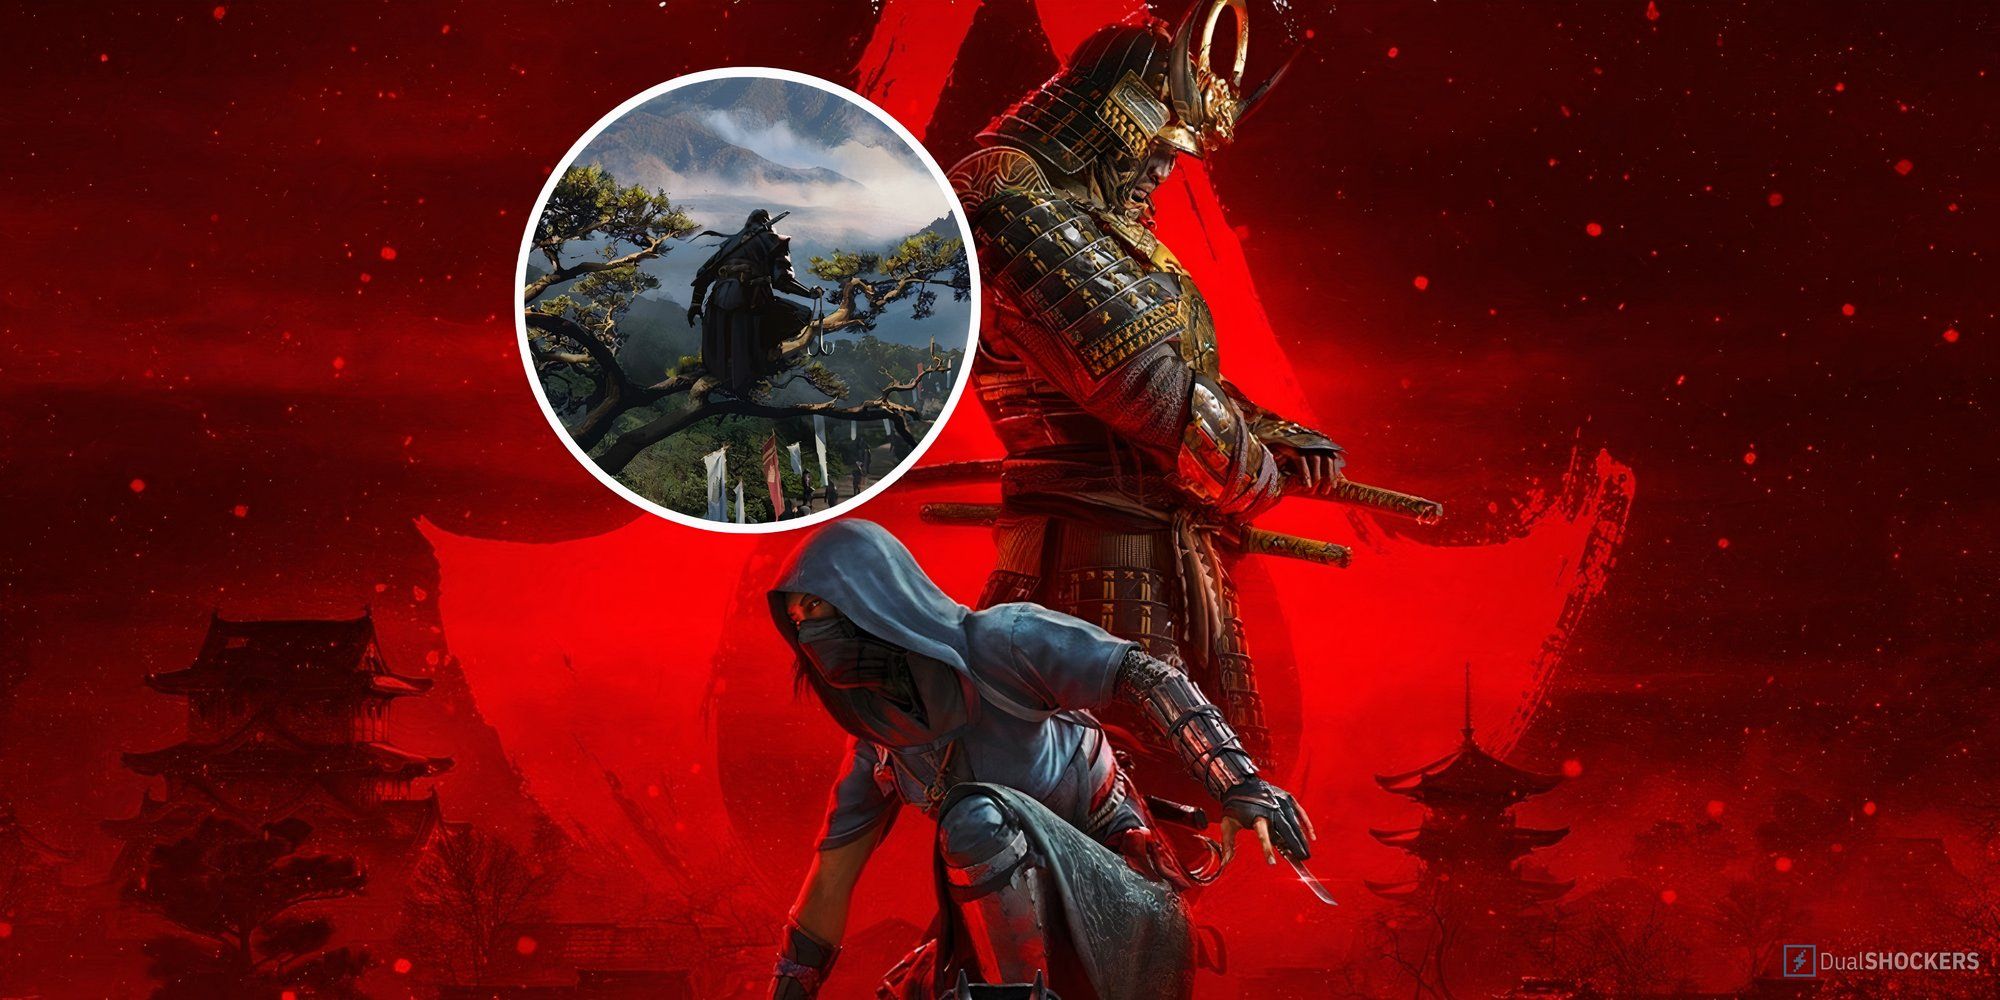 Promotional still from Assassin's Creed Shadows of Yasuke and Naoe and a circle image of an assassin crouching in the trees.